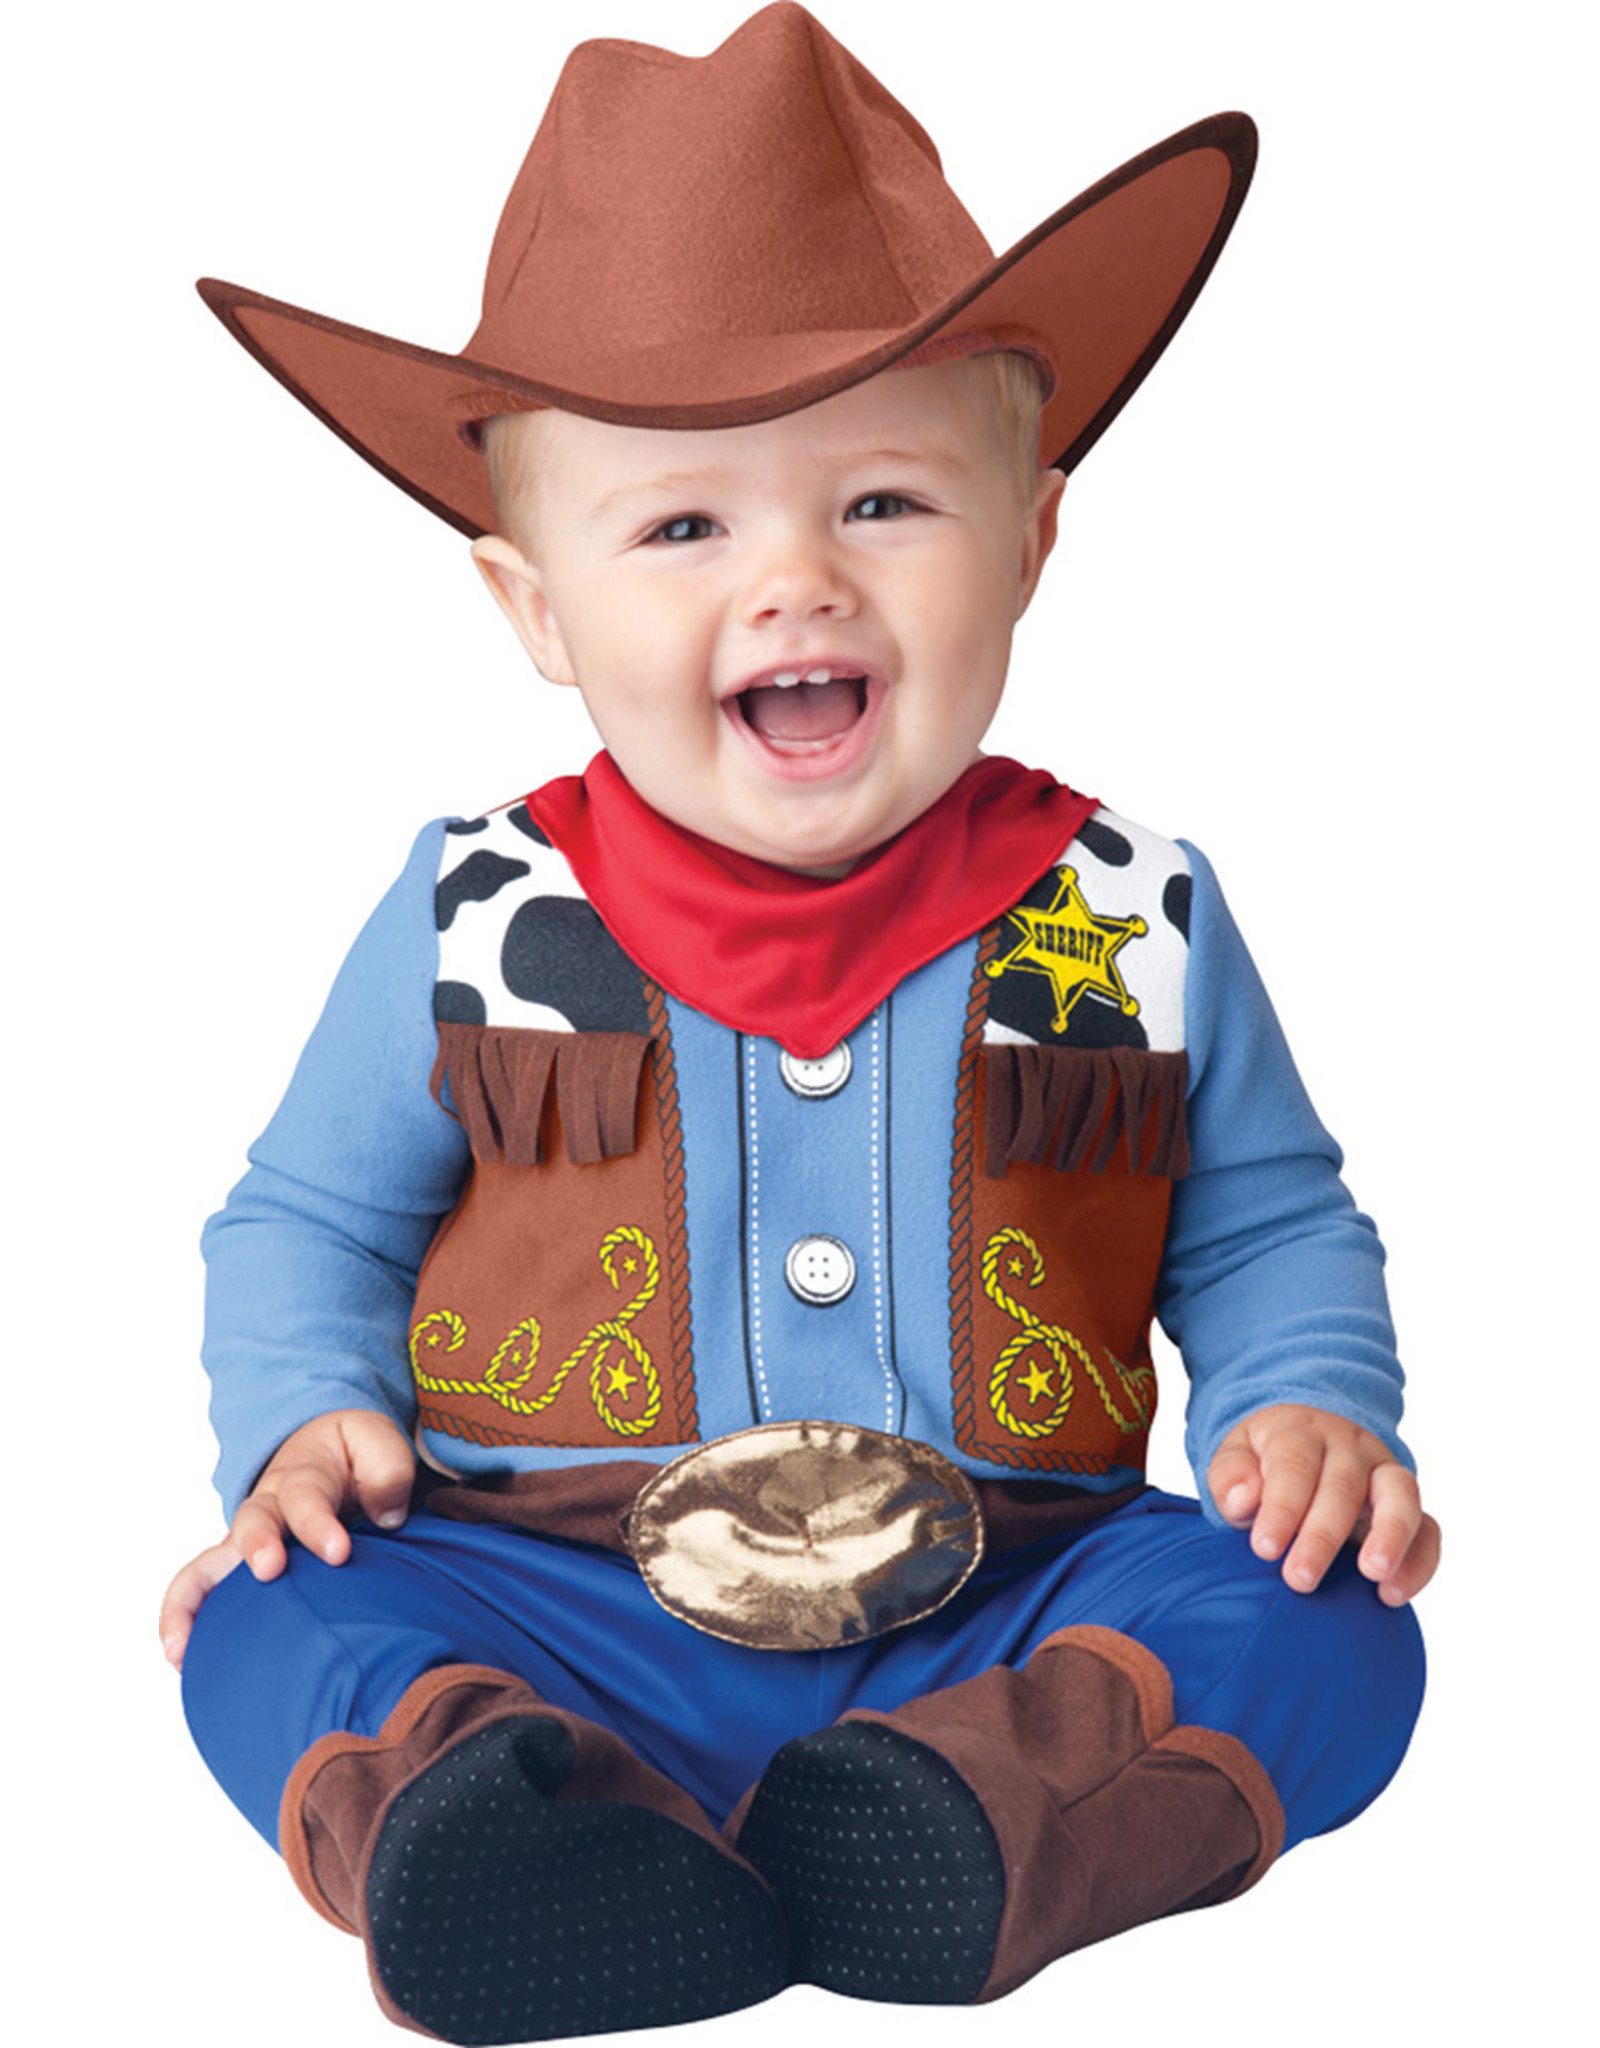 Incharacter Costumes Wee Wrangler, Multi, 18-24 Months (Toddler), 10624